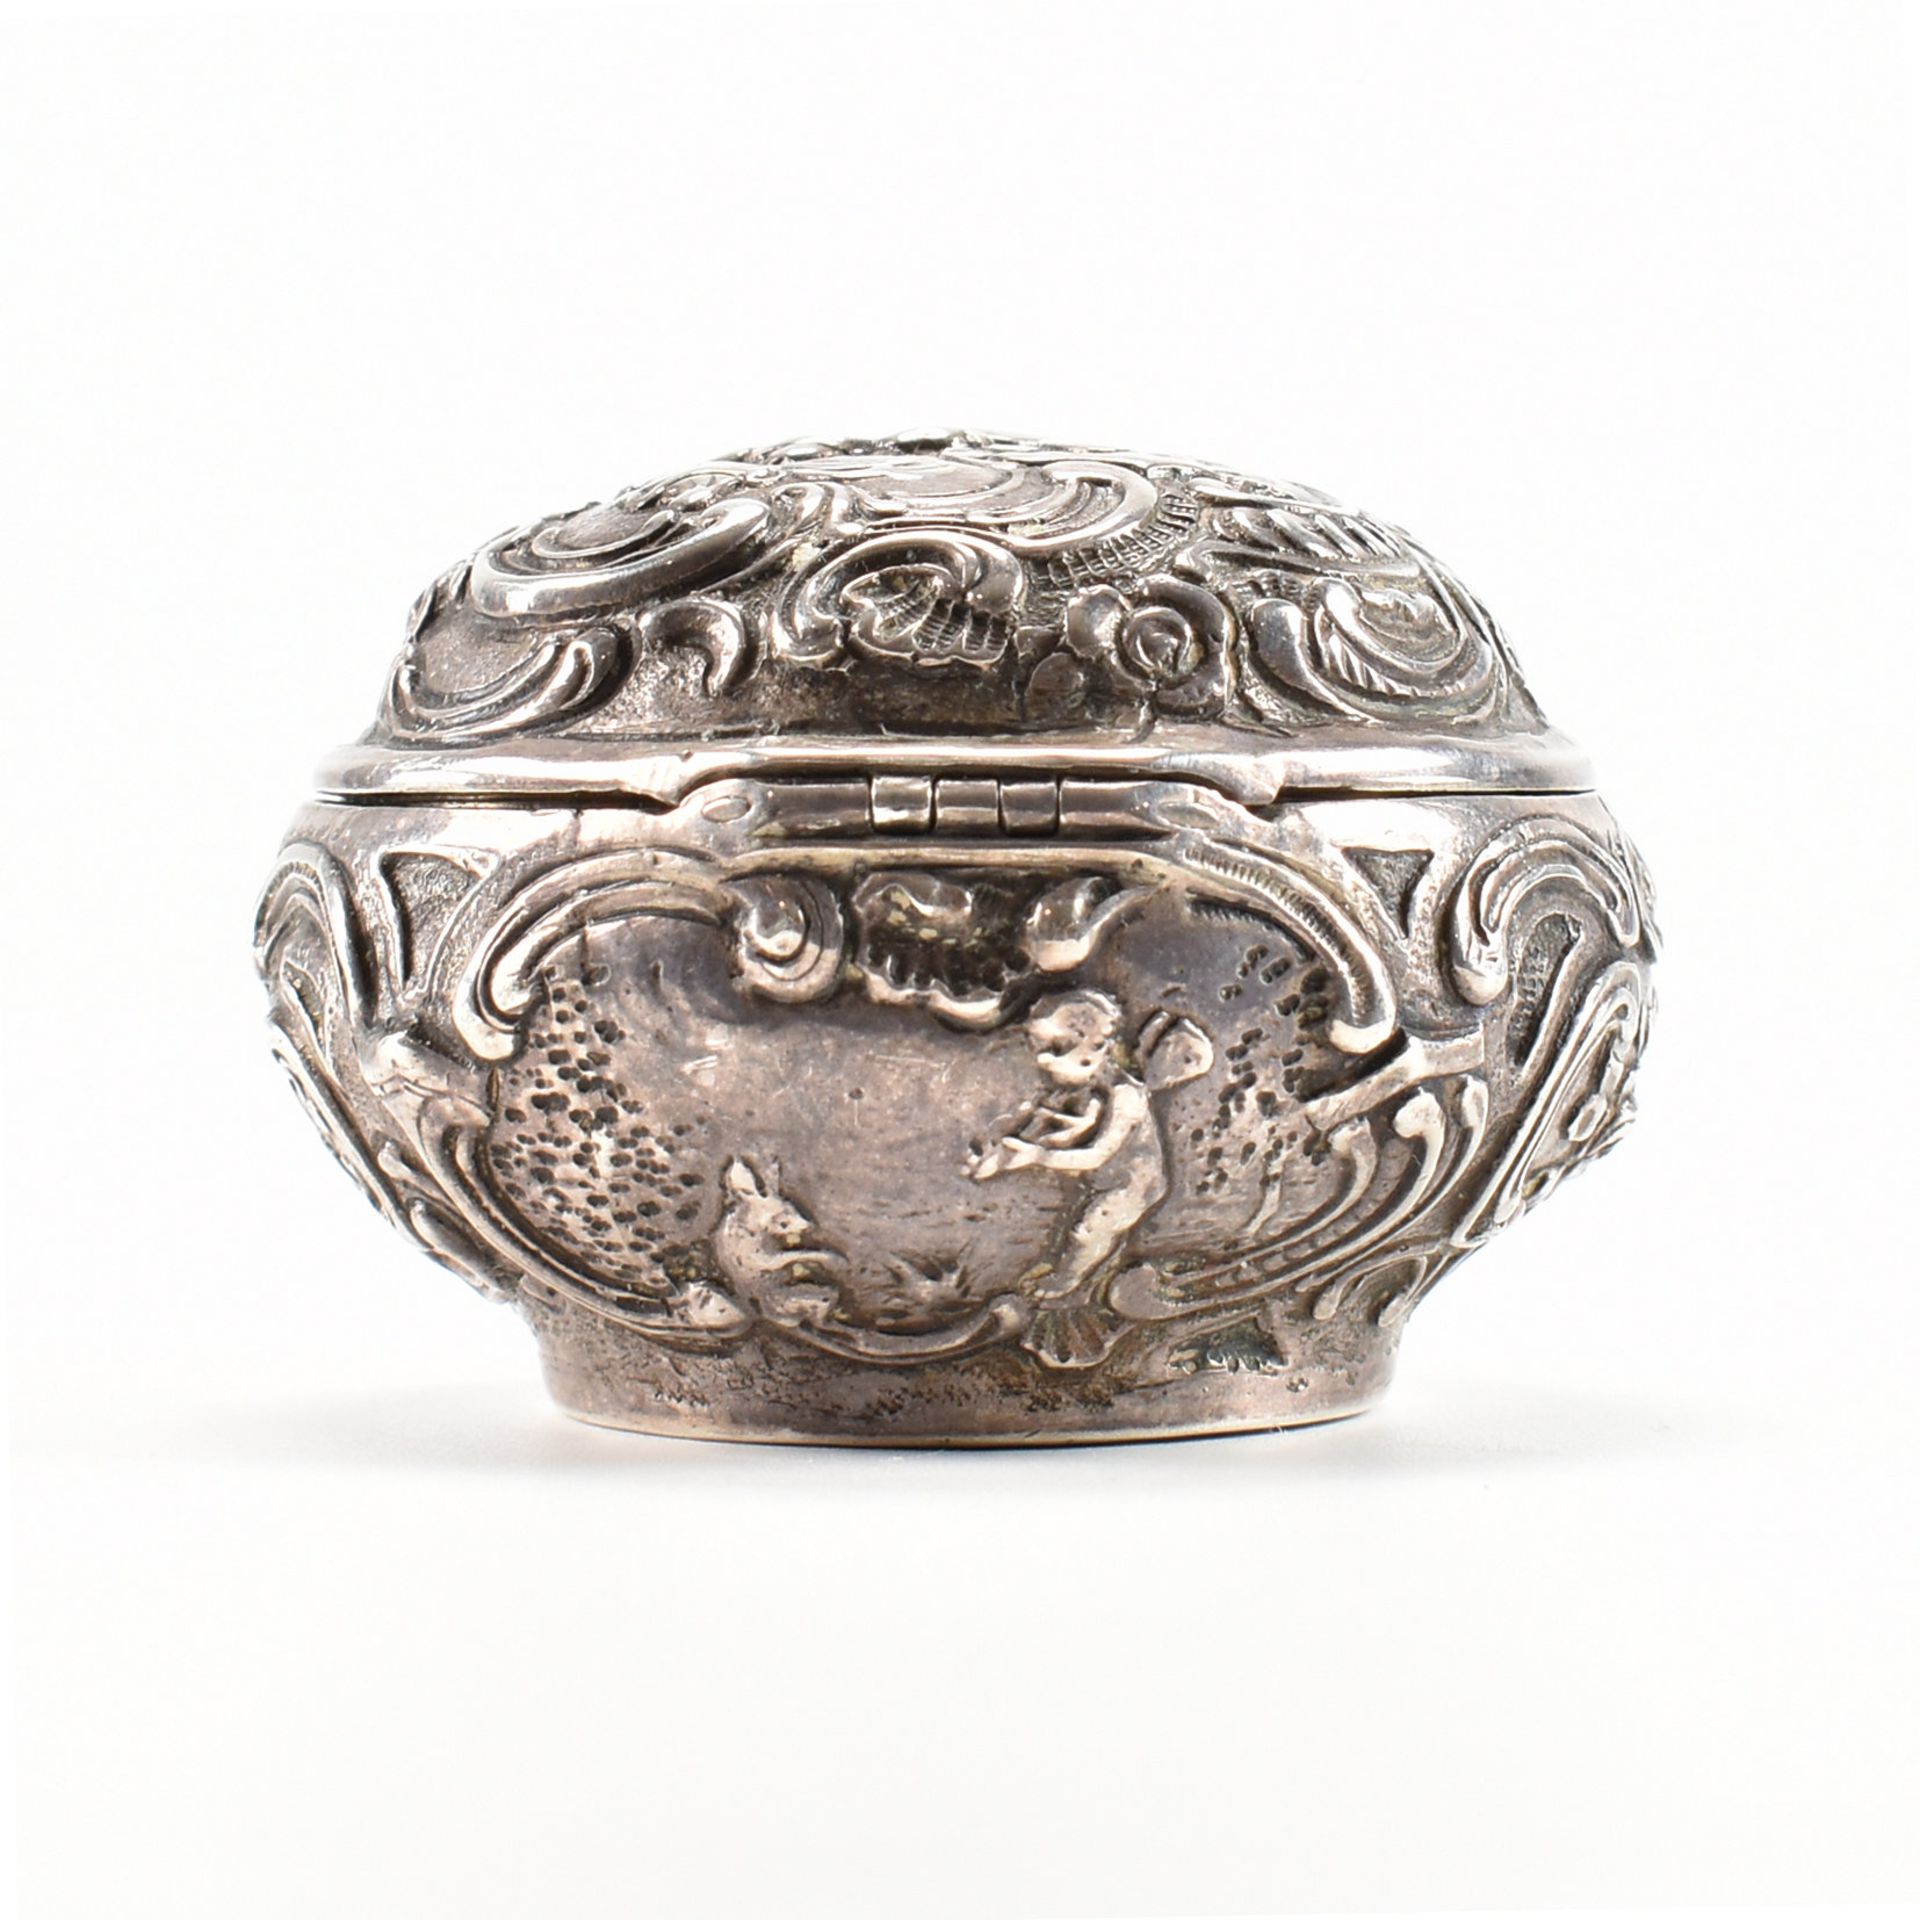 SILVER HALLMARKED REPOUSSE DECORATED BOX - Image 5 of 7